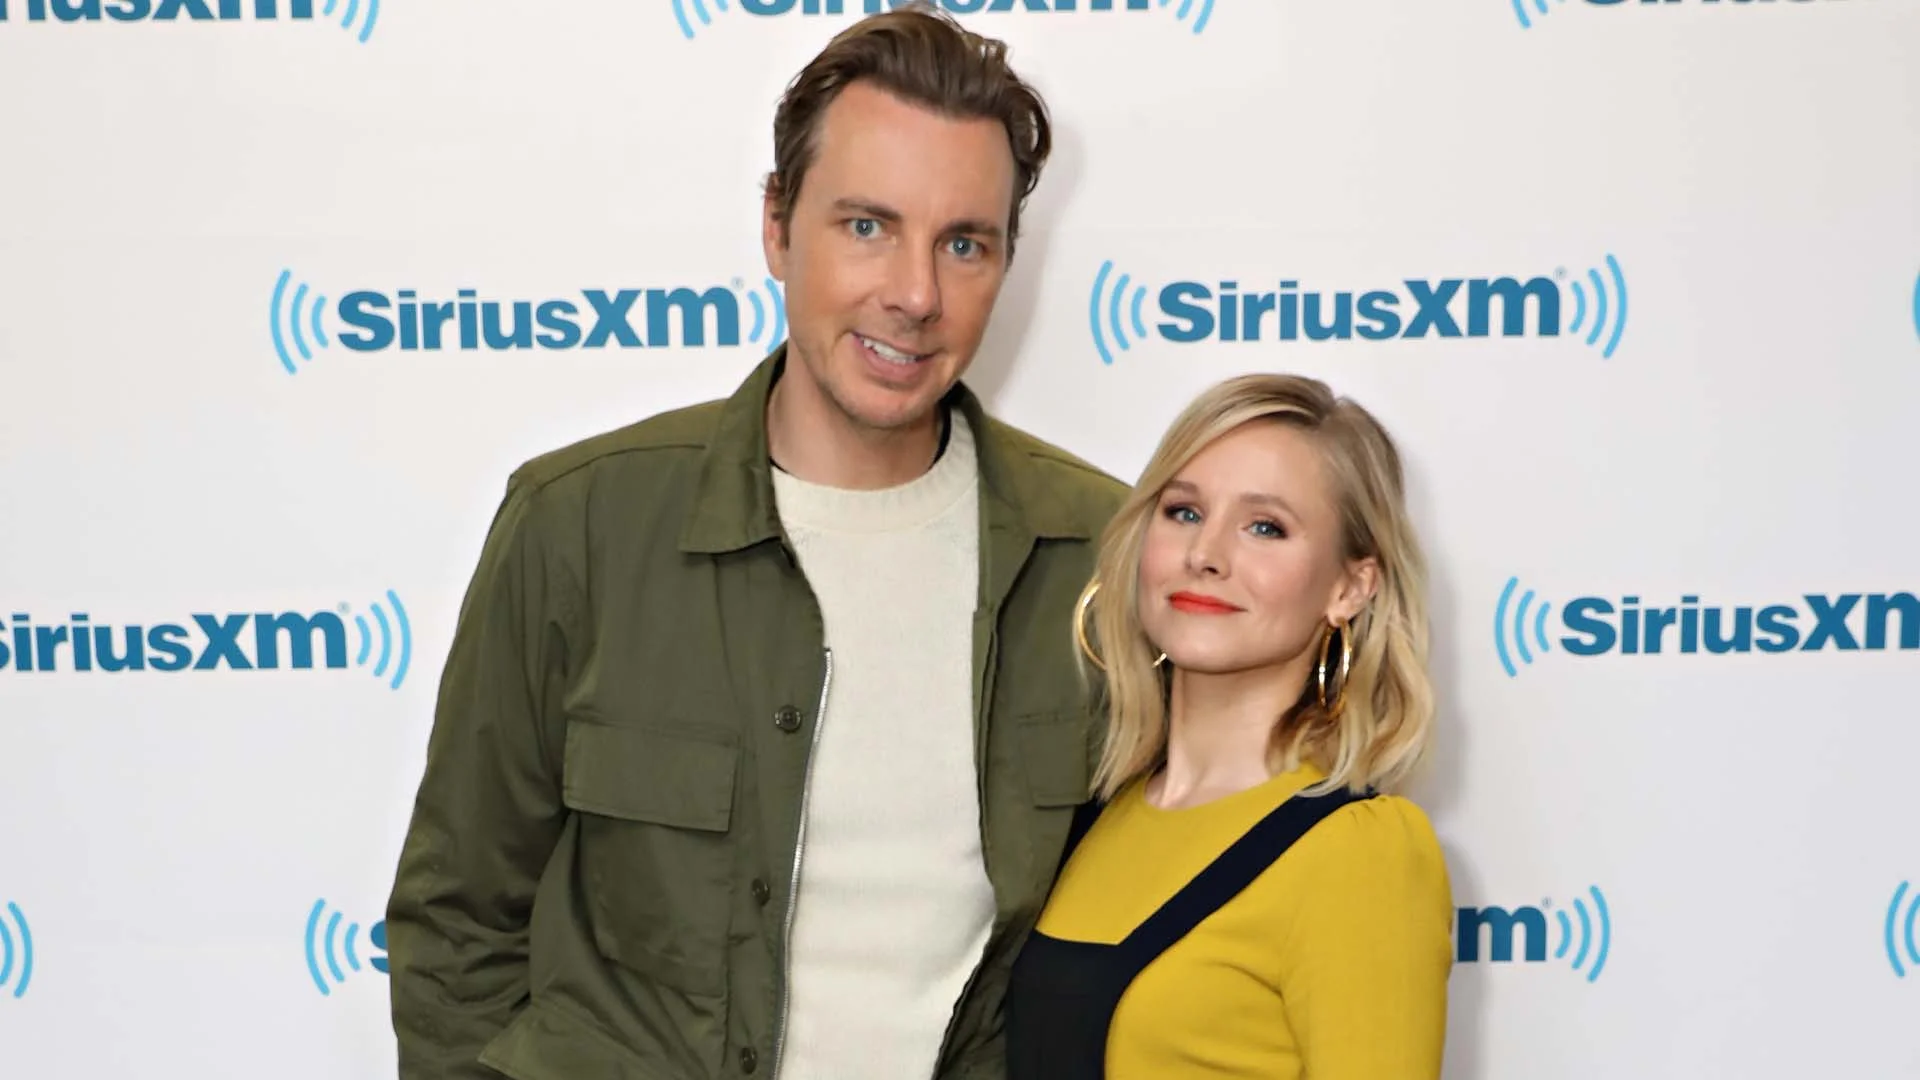 This cute caption from Dax Shepard on Kristen Bell says it all: "I am sexually attracted to her"